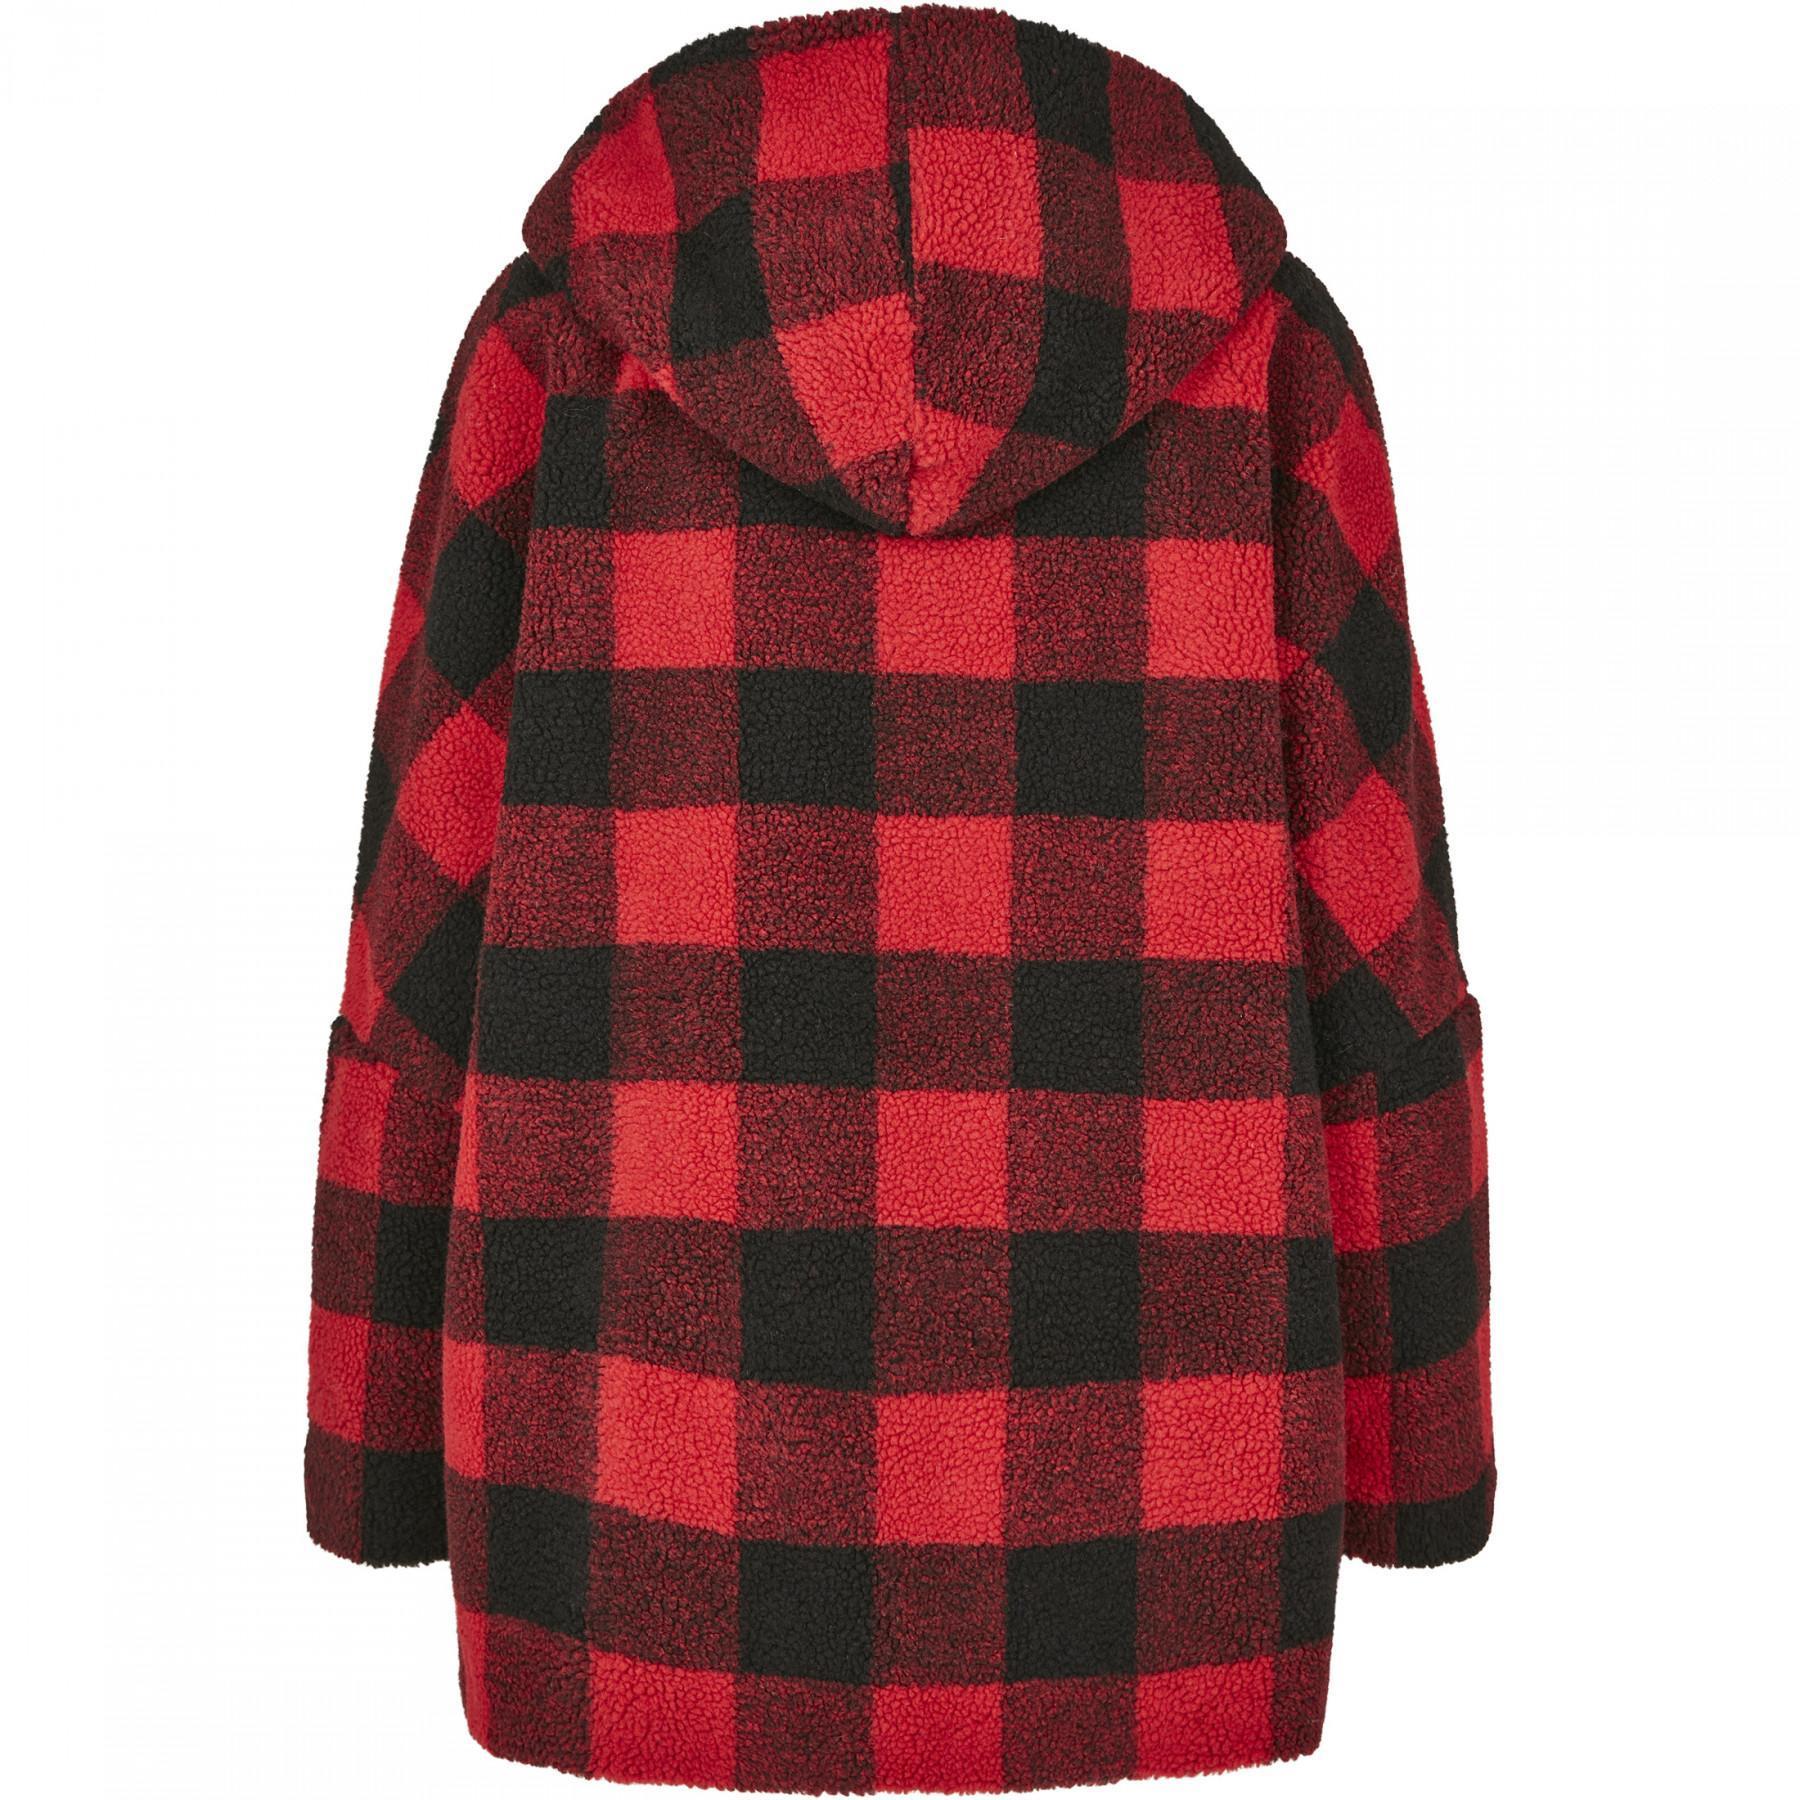 Women's Urban Classic hooded check parka